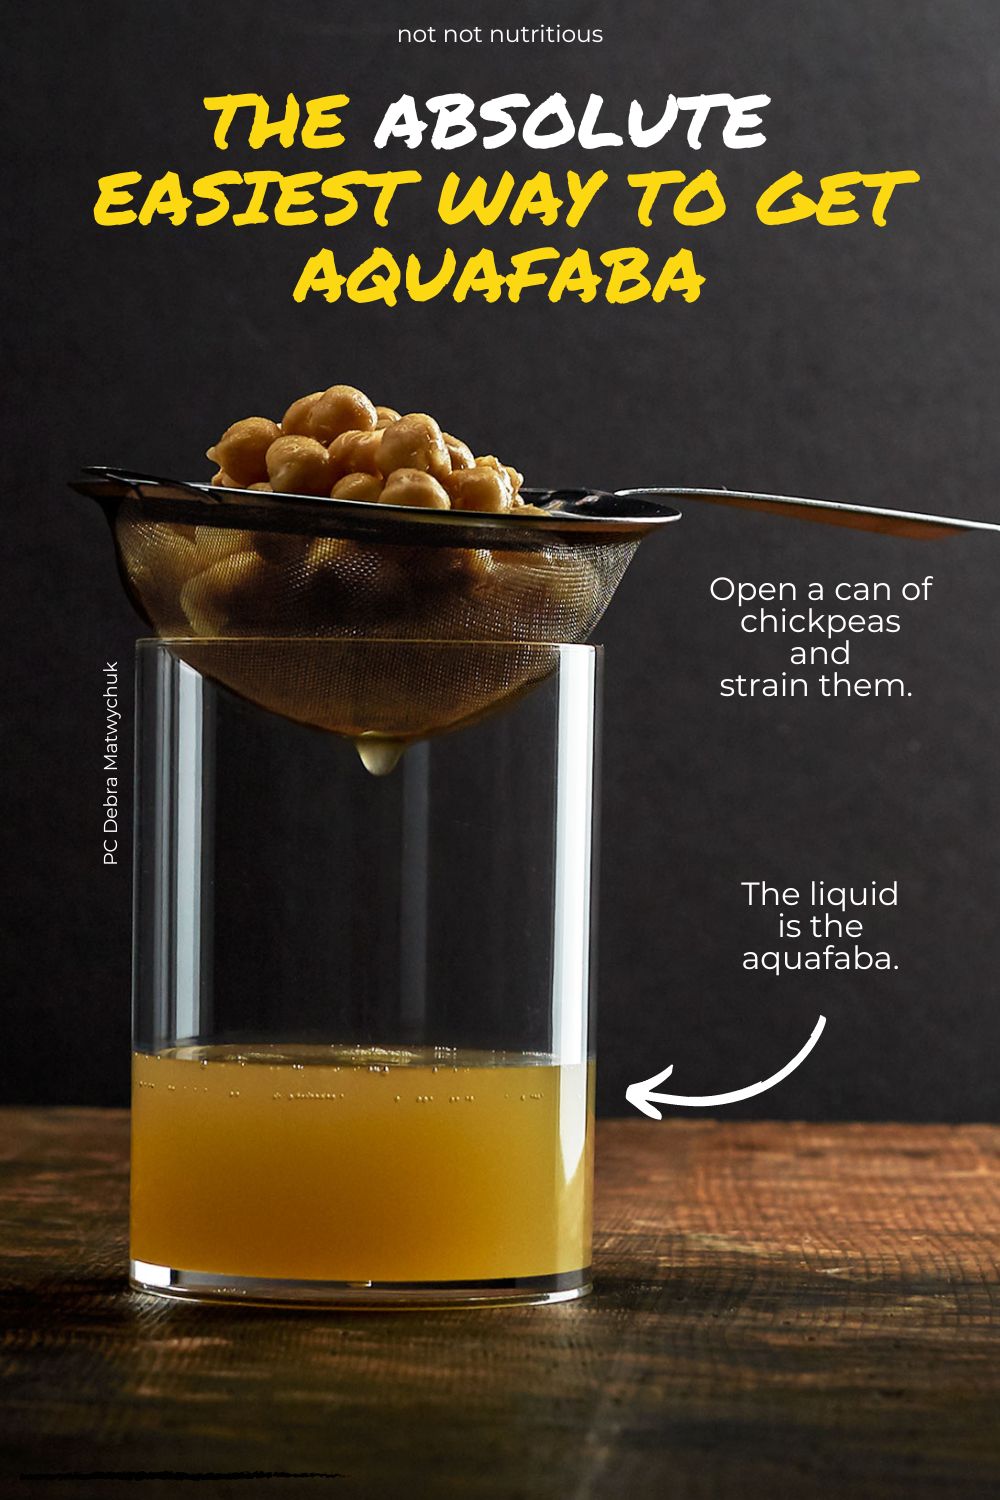 Th easiest way to get aquafaba is to open a can of chickpeas and strain them. The liquid is the aquafaba. 